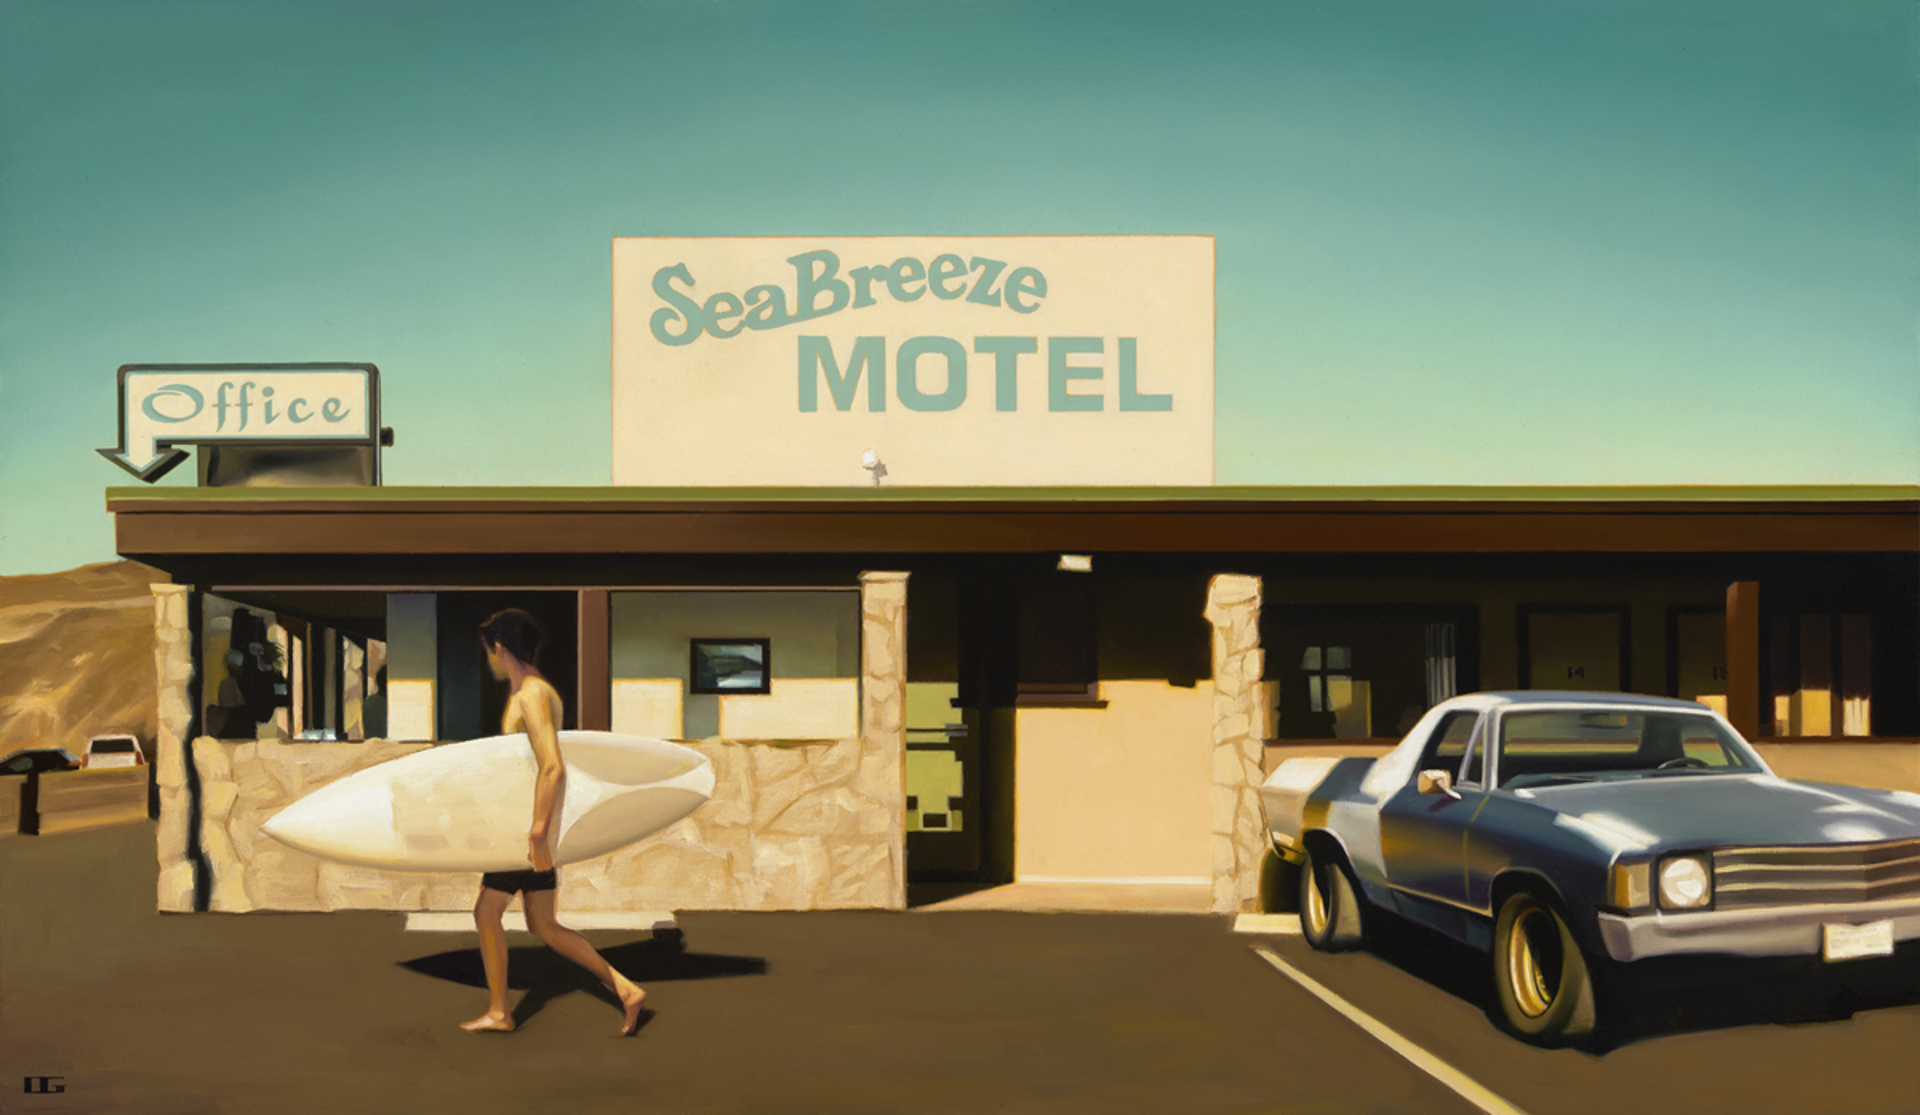 Sea Breeze Motel (S/N) by Carrie Graber